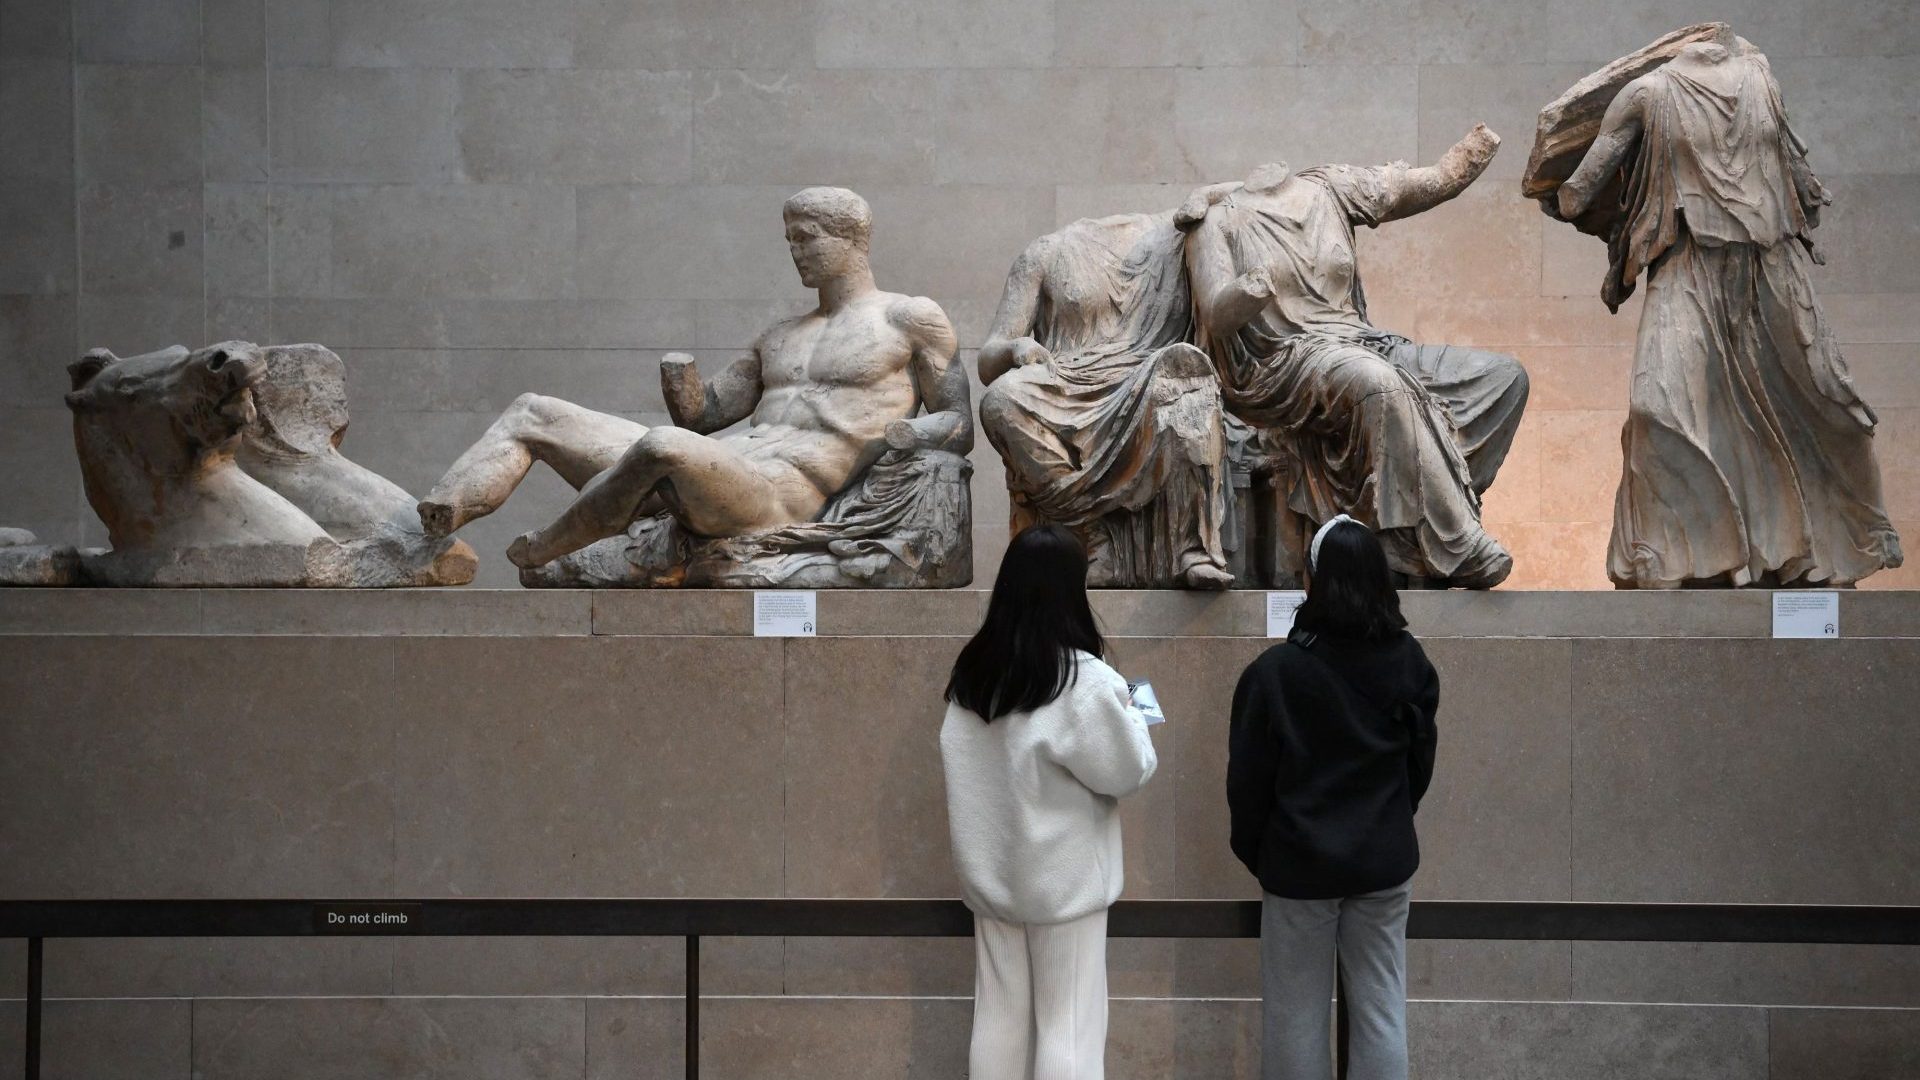 Visitors view the Parthenon Marbles, also known as the Elgin Marbles, at the British Museum in London. Photo:  DANIEL LEAL/AFP via Getty Images